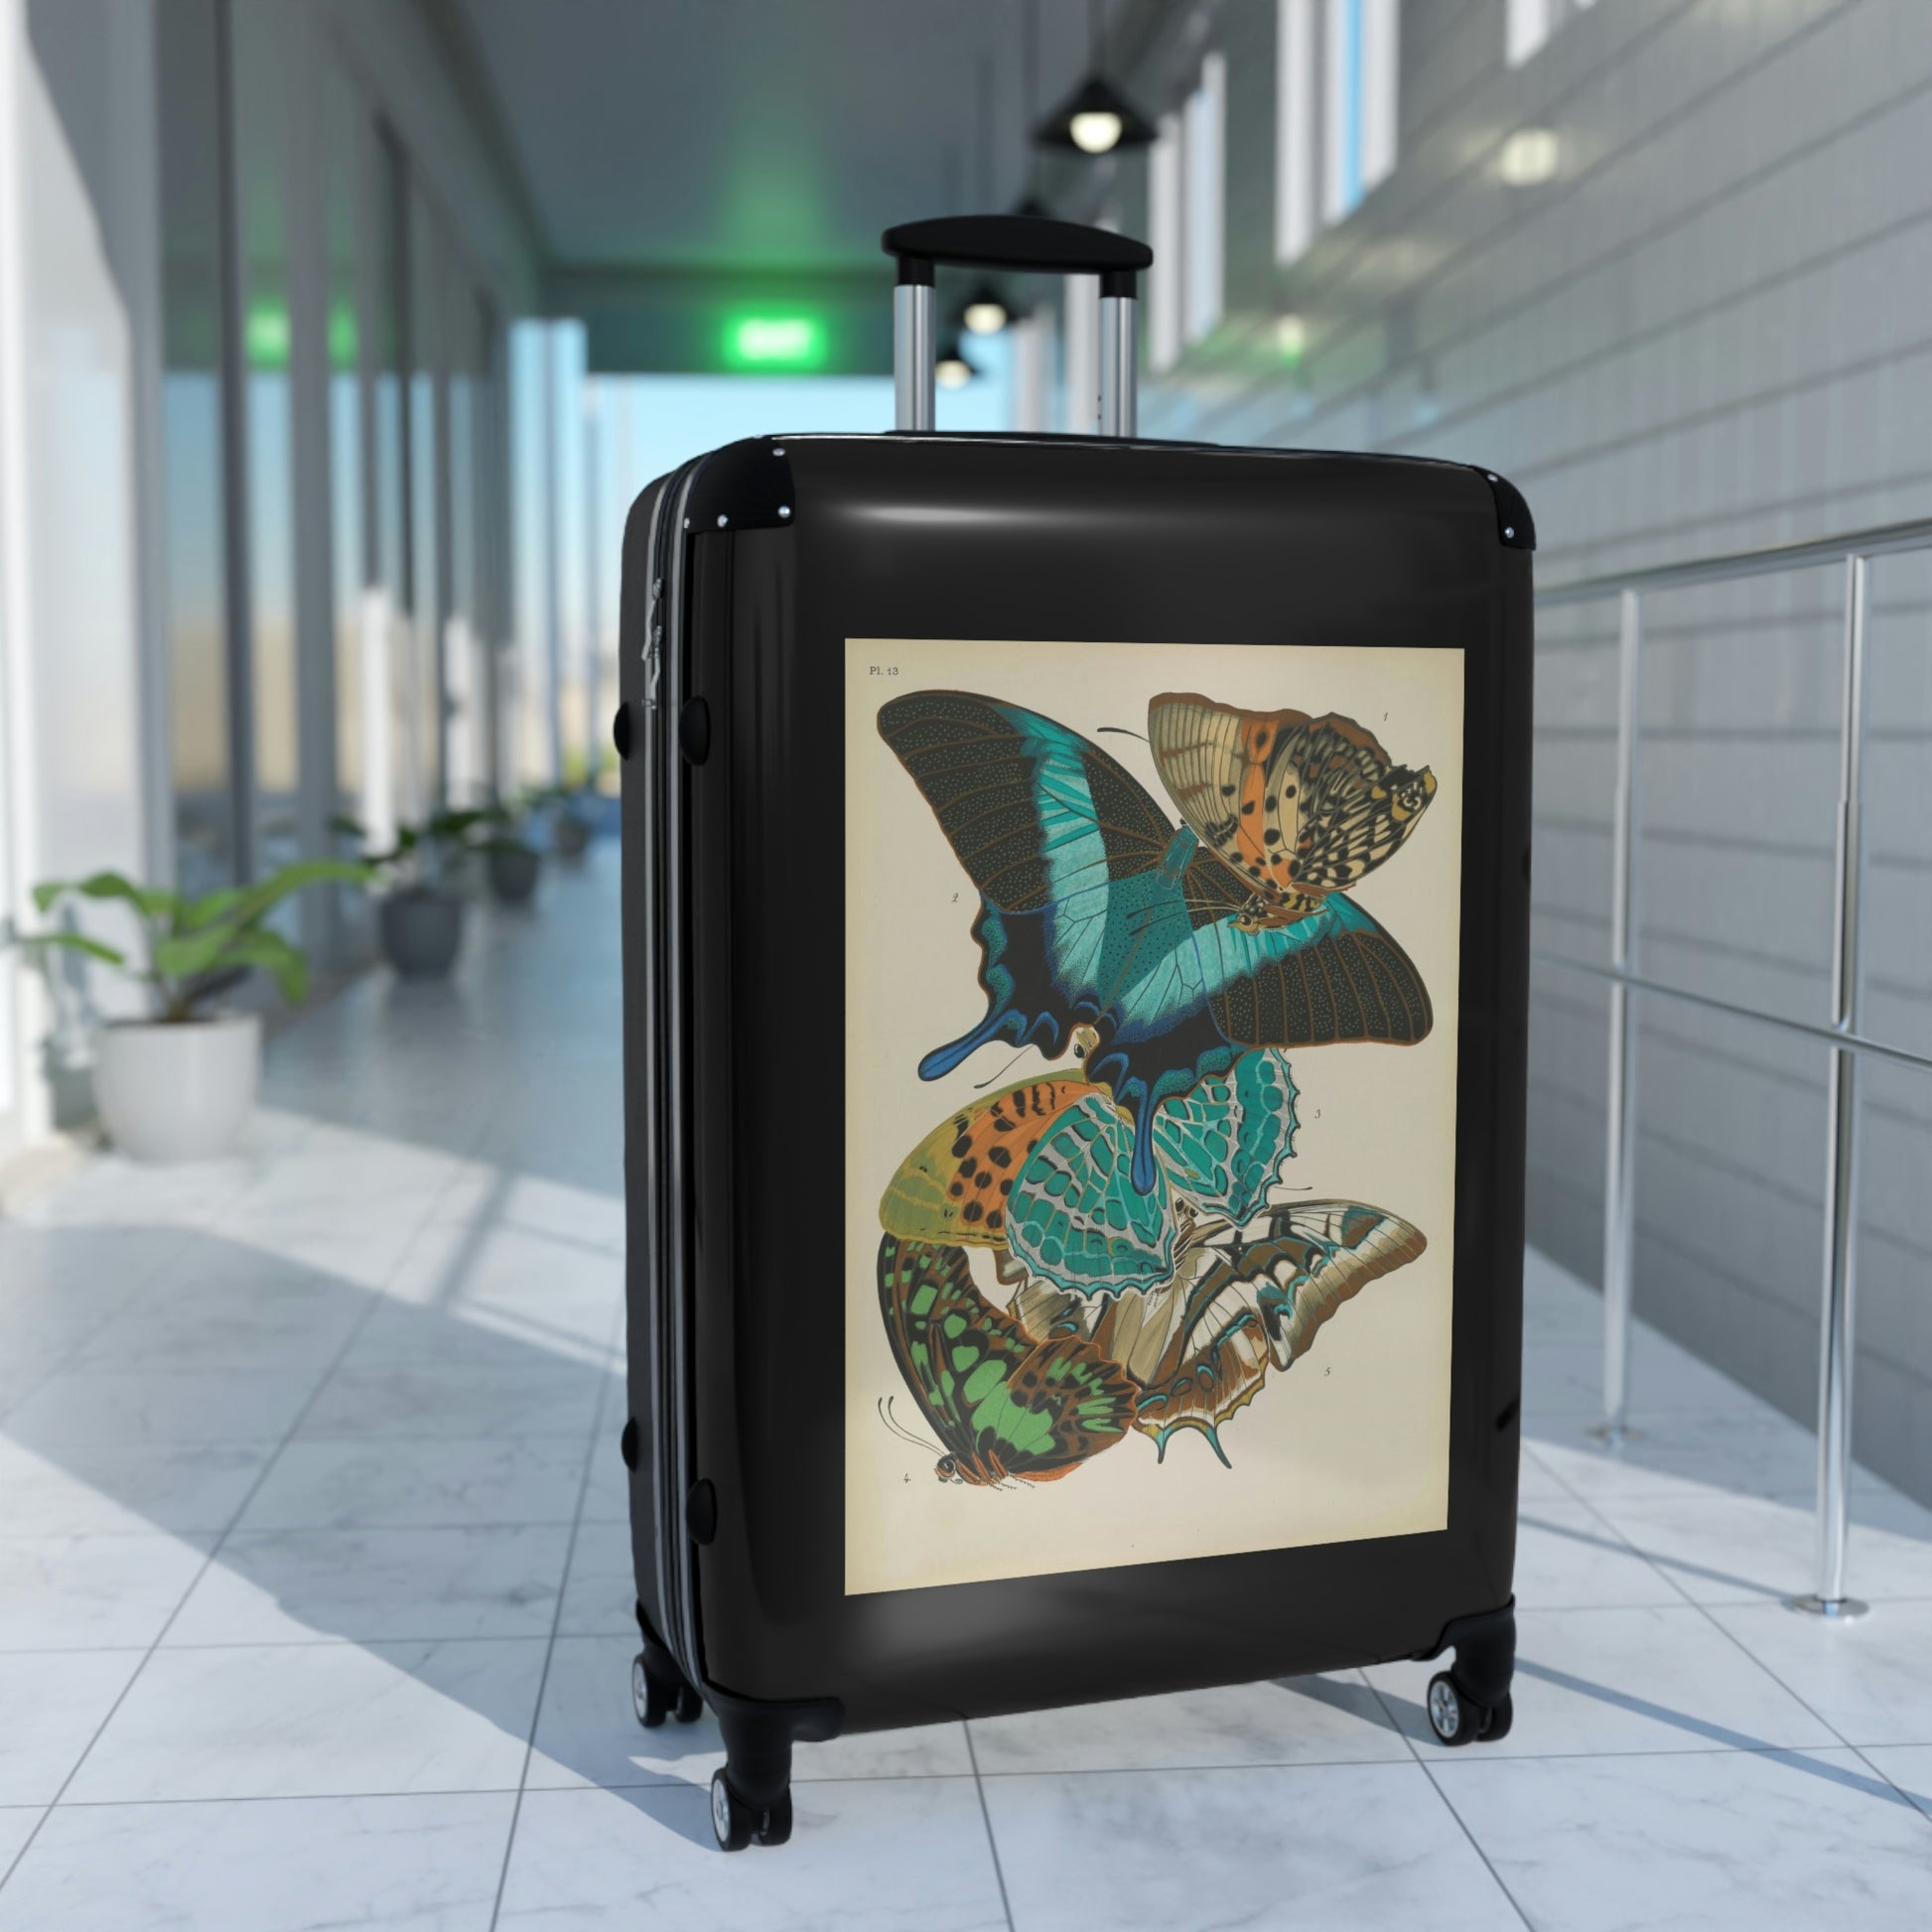 Getrott Butterflies Macrolepidopteran Rhopalocera Lepidoptera Turquoise Colors Cabin Suitcase Rolling Luggage Extended Storage Adjustable Telescopic Handle Double wheeled Polycarbonate Hard-shell Built-in Lock-Bags-Geotrott